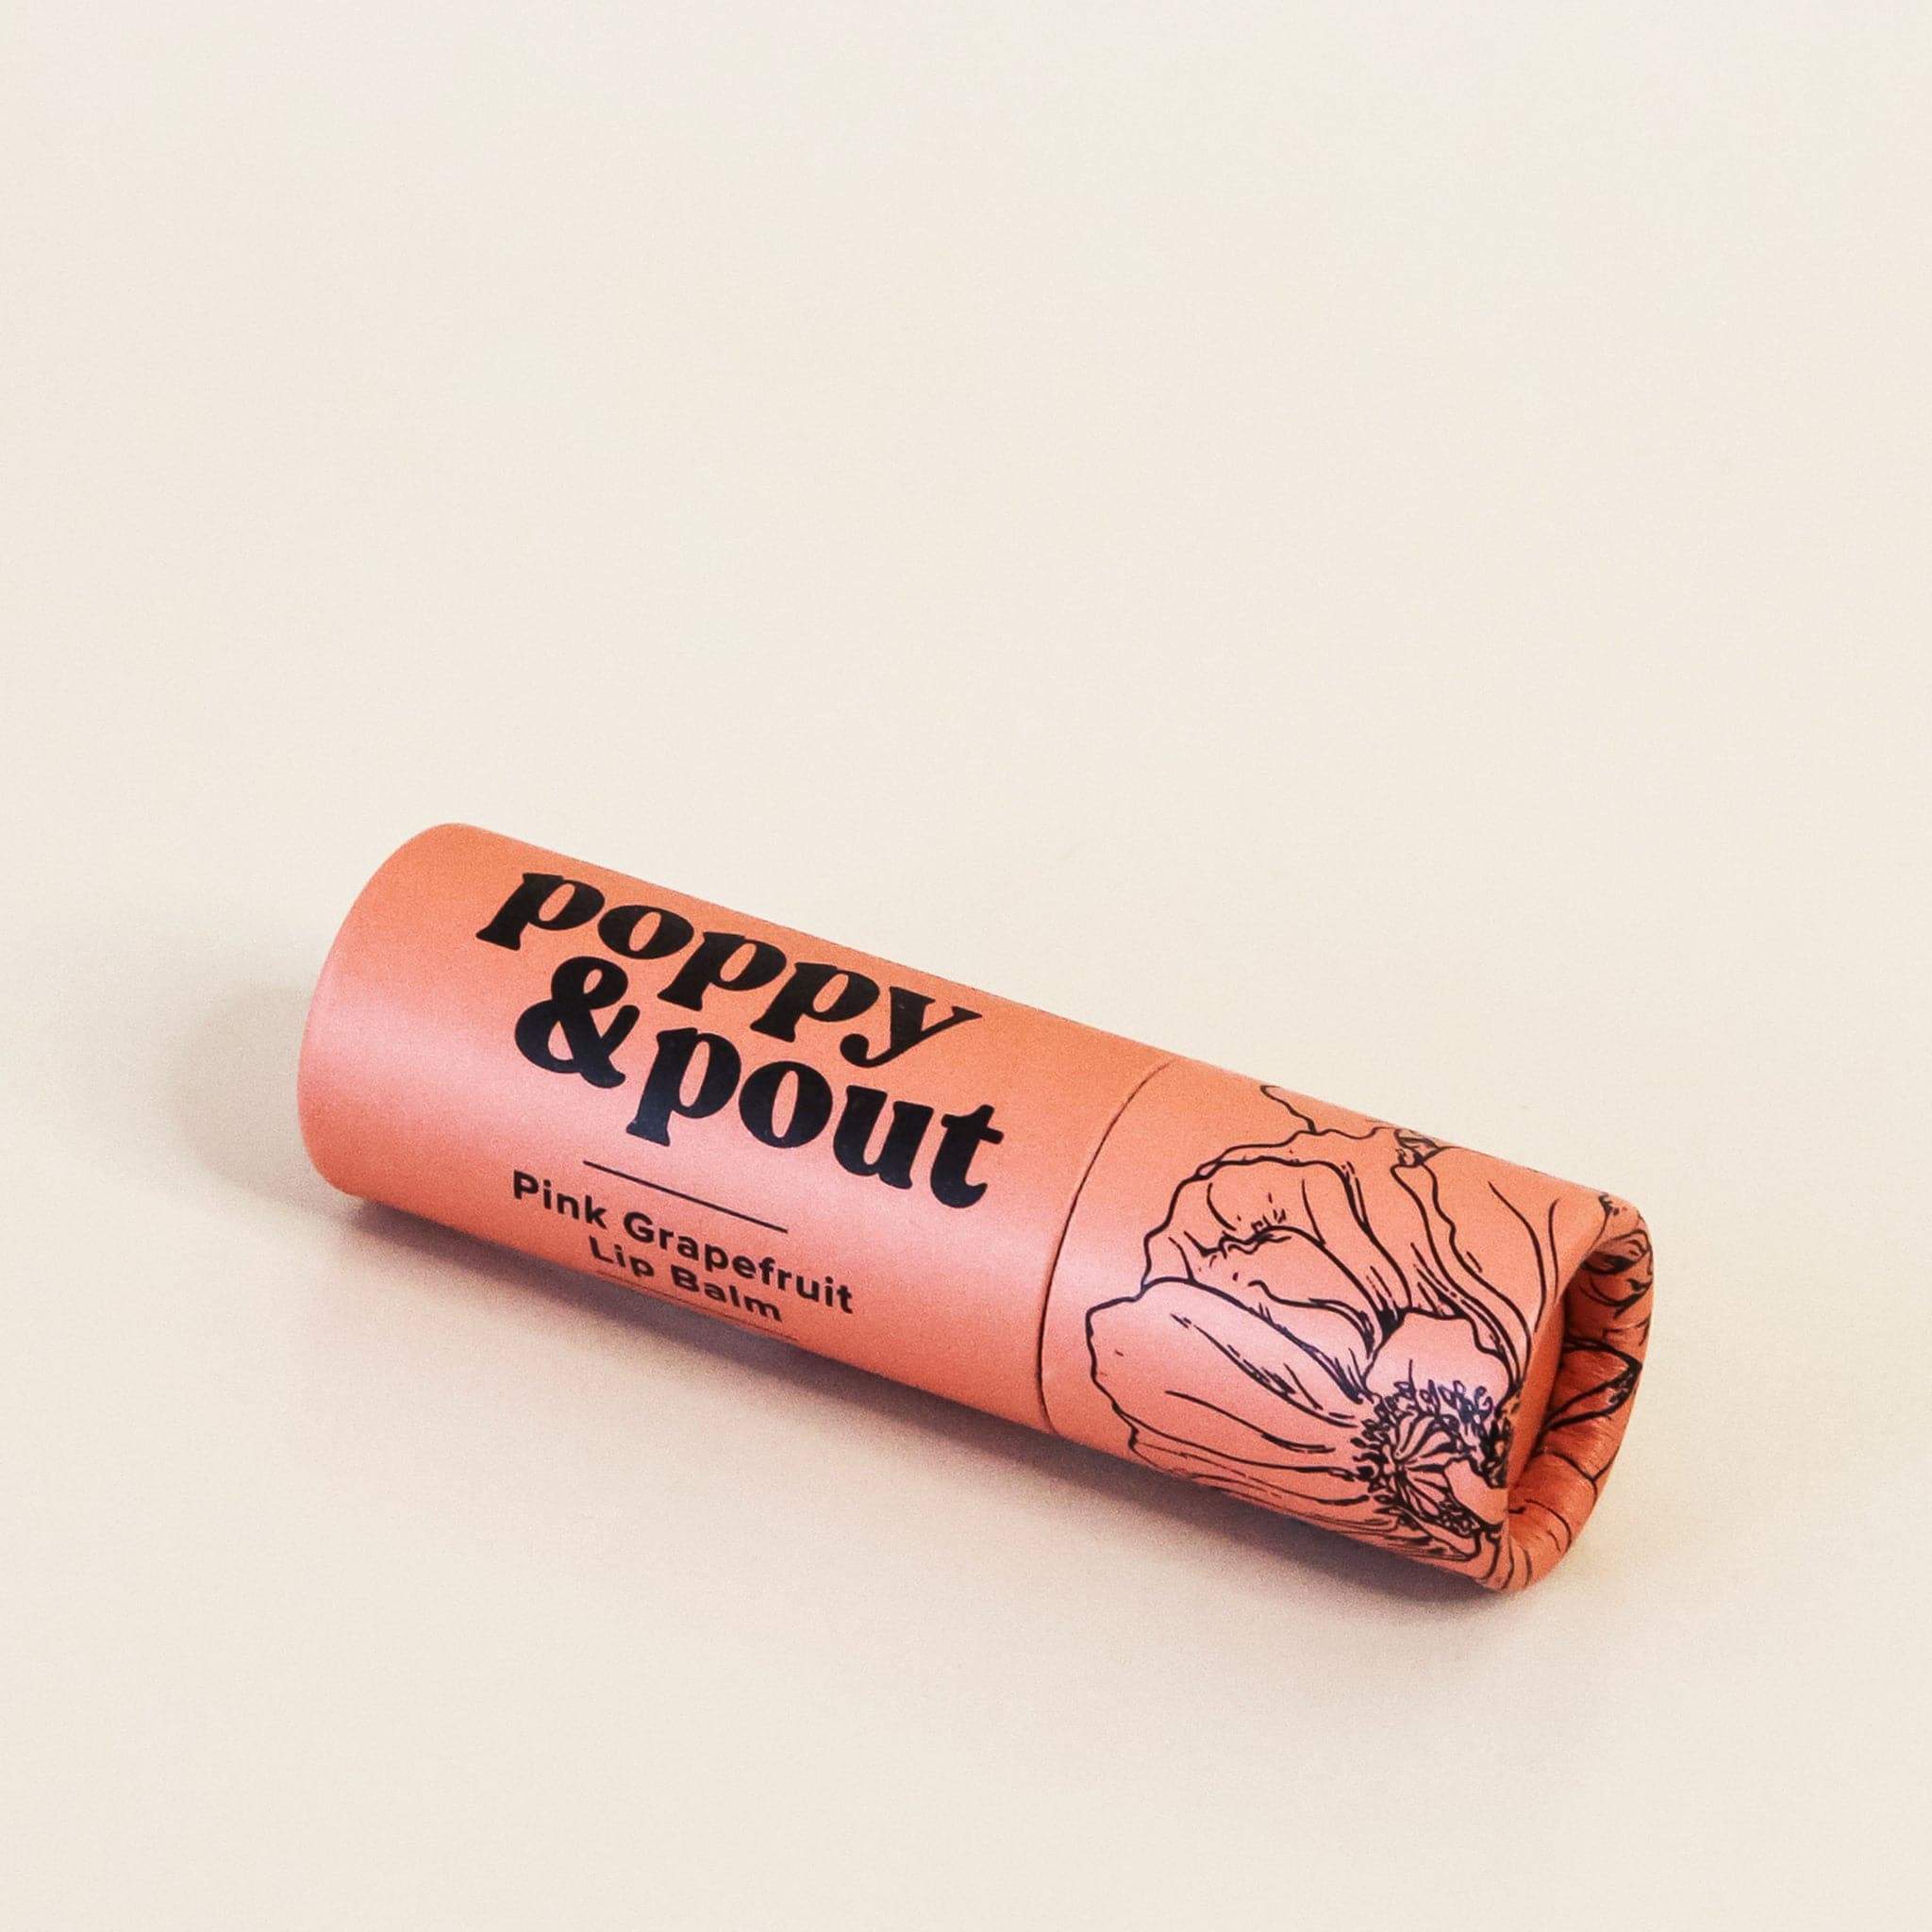 In front of white background is a round peach tube. On the right side is a black drawing of a flower. On the right side is black text that reads ‘poppy & pout, pink grapefruit lip balm.'